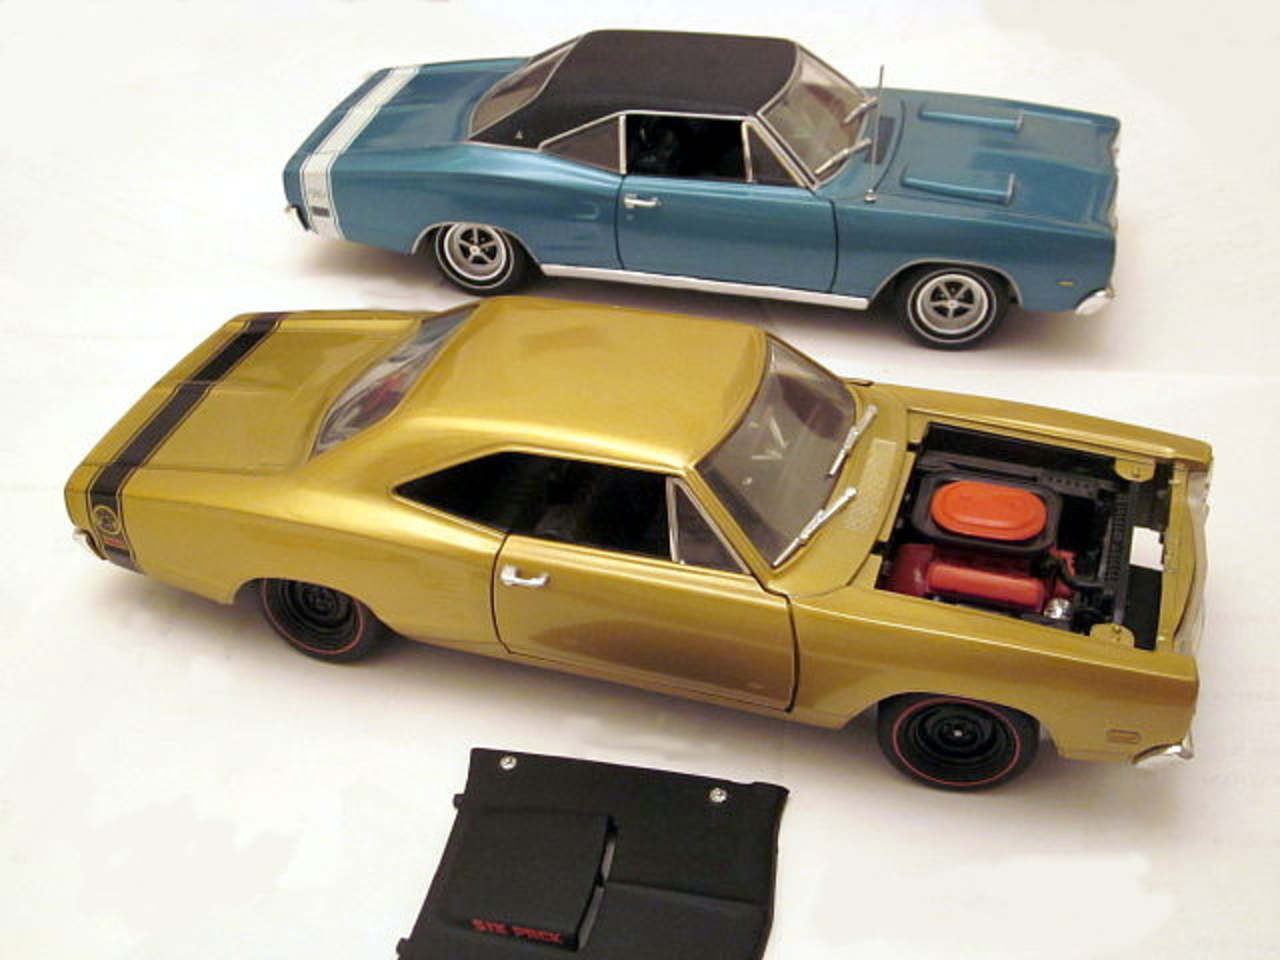 Ertl 1:18 1969 Dodge Coronet Super Bee and R/T | Flickr - Photo ...